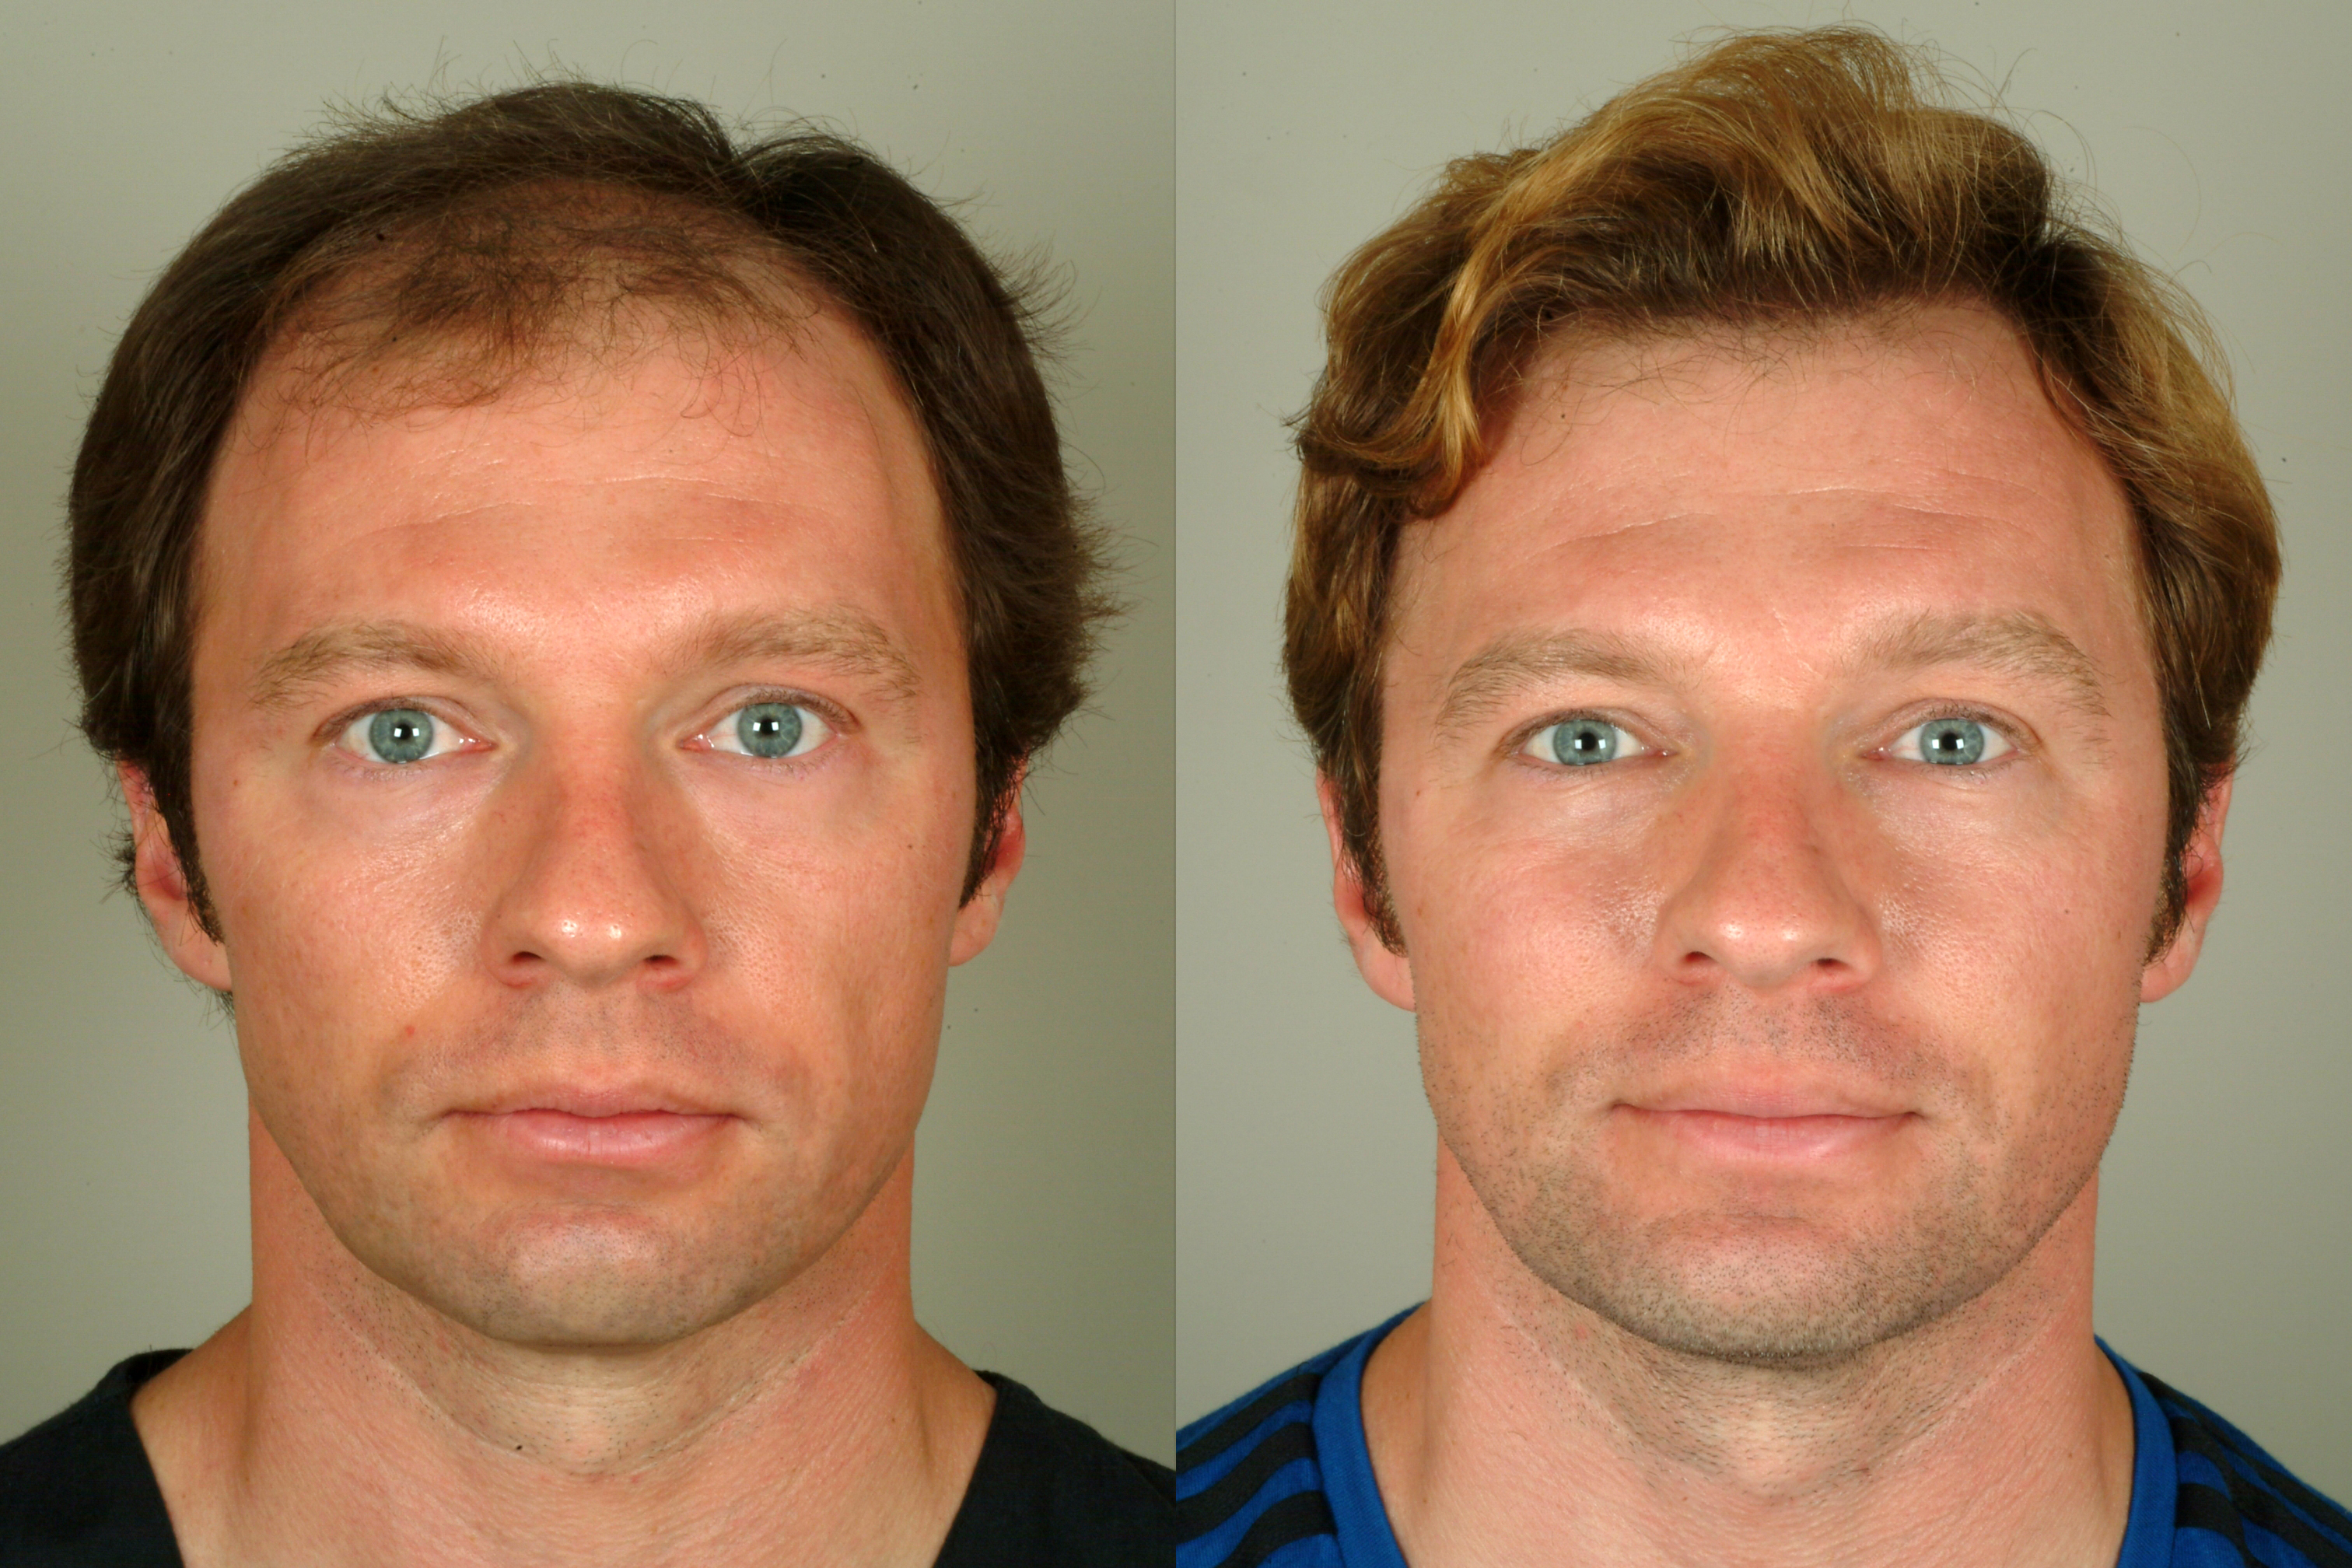 Clevaland Hair Transplants - Before and After - Dr. Haber